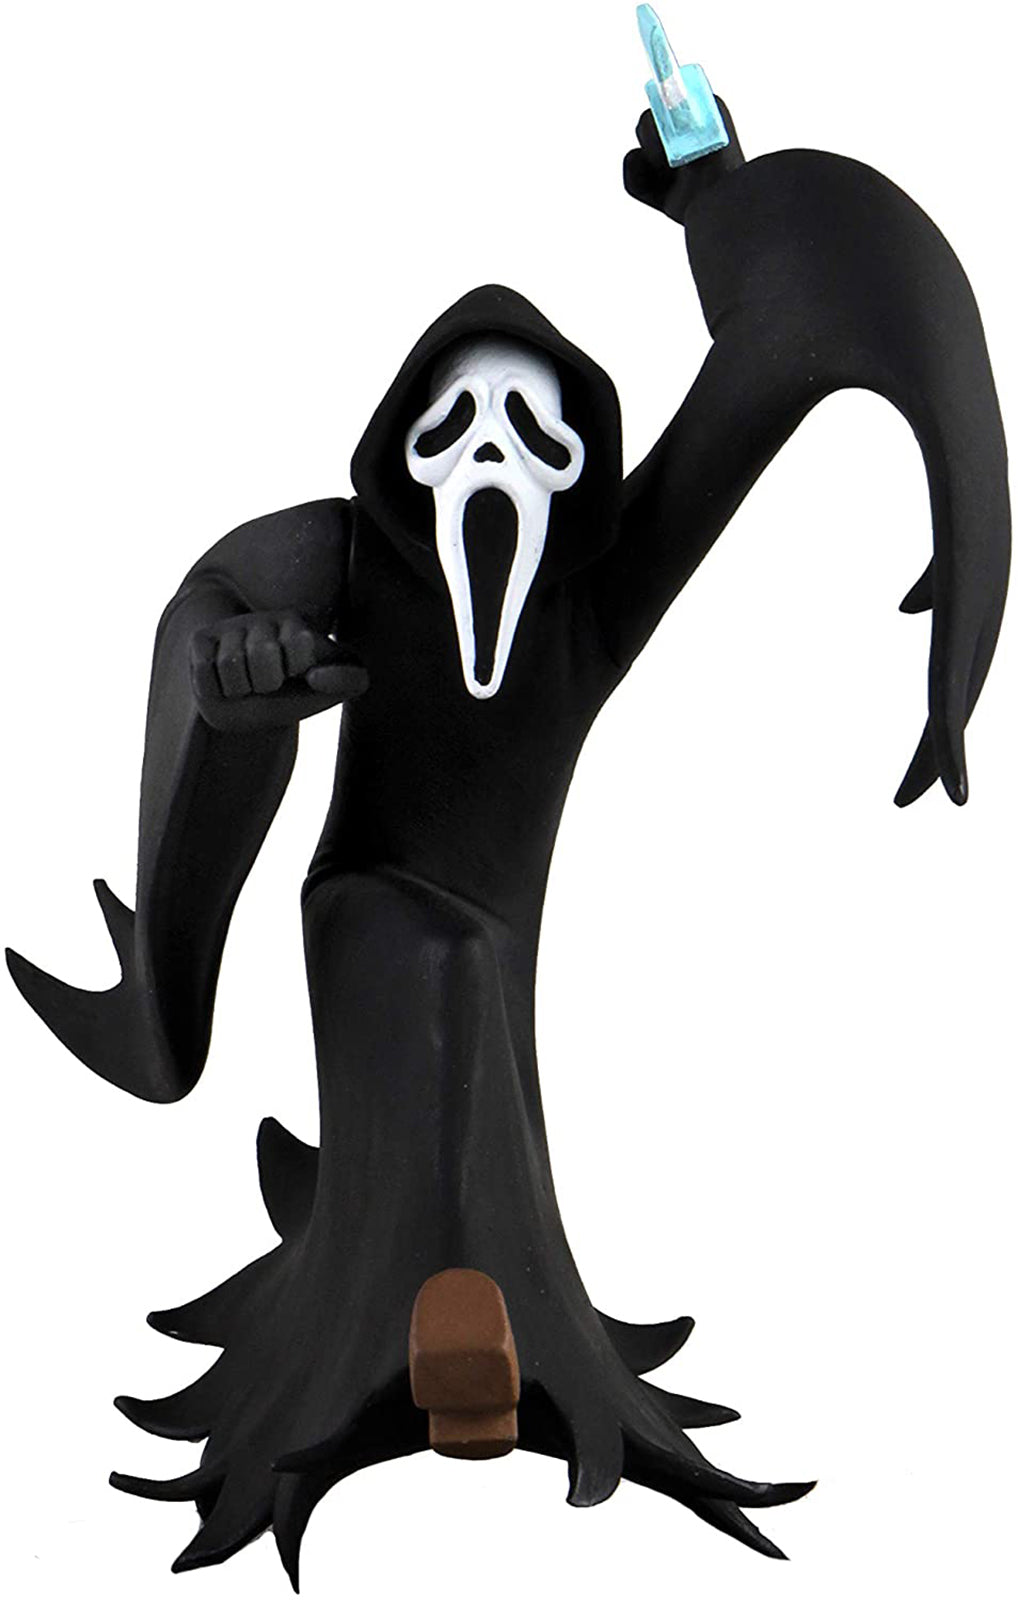 Scream Toony Terrors Series 5 Action Figure | Ghost Face